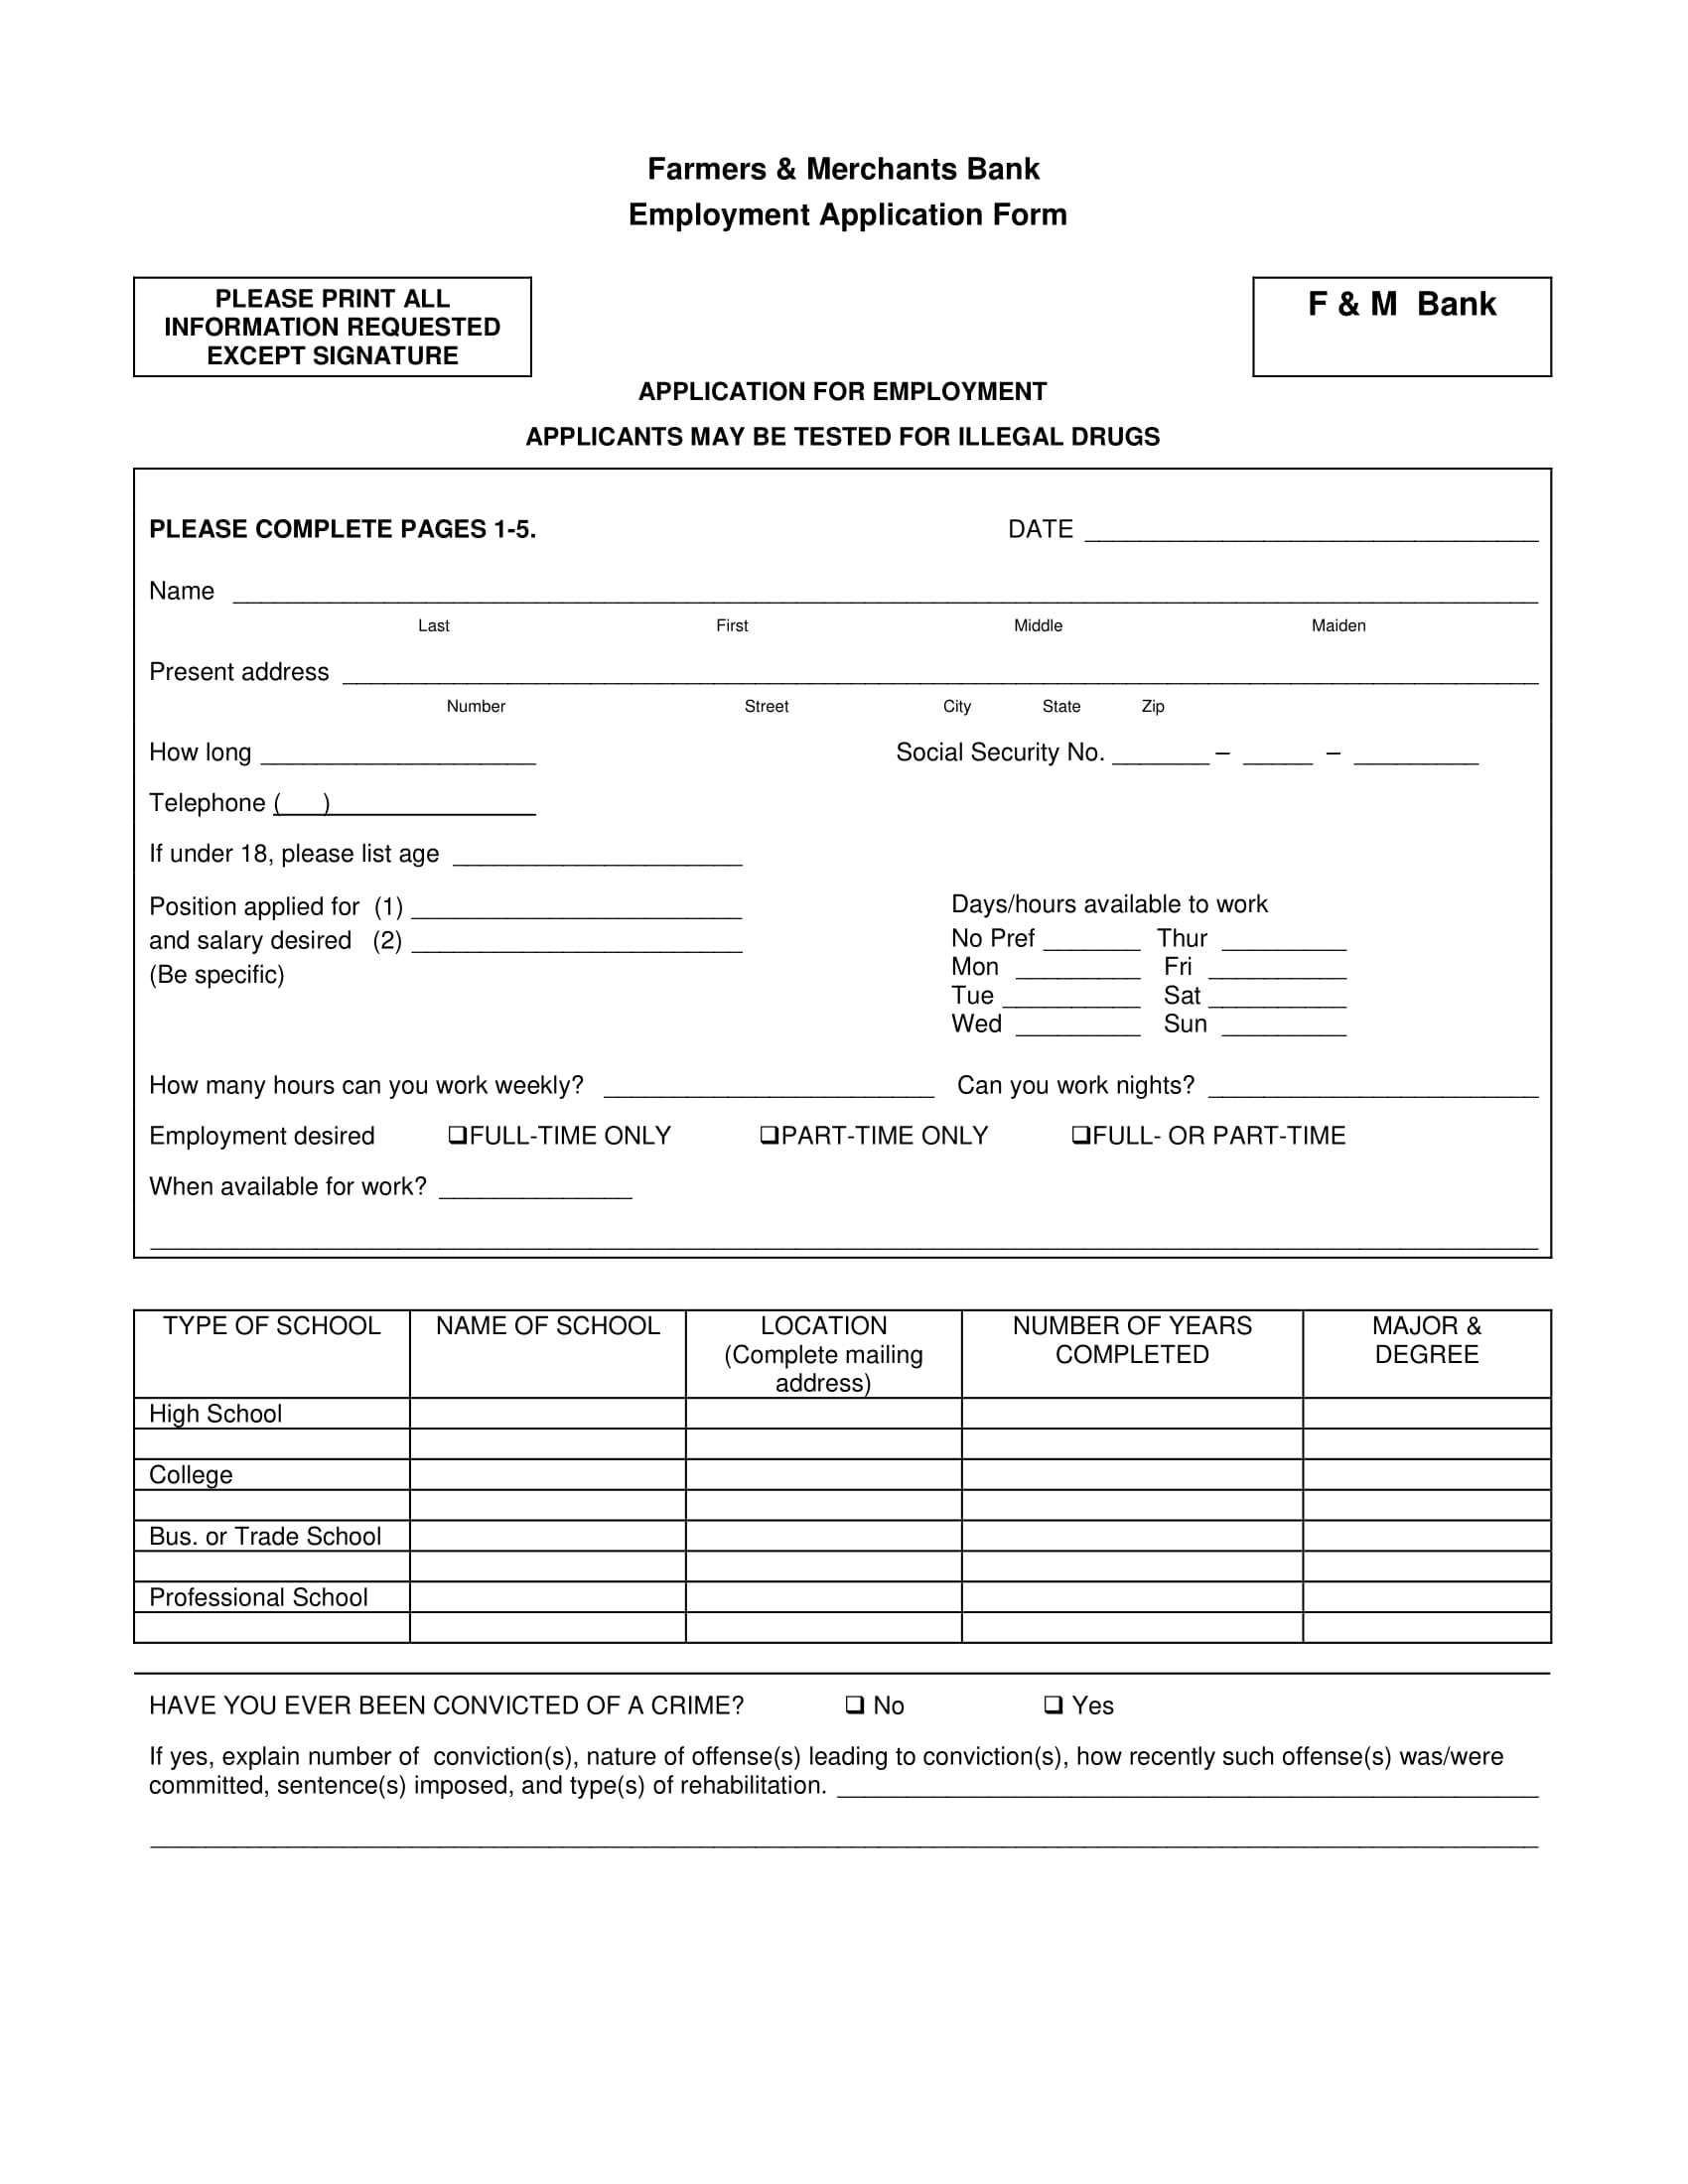 example of an employment application form